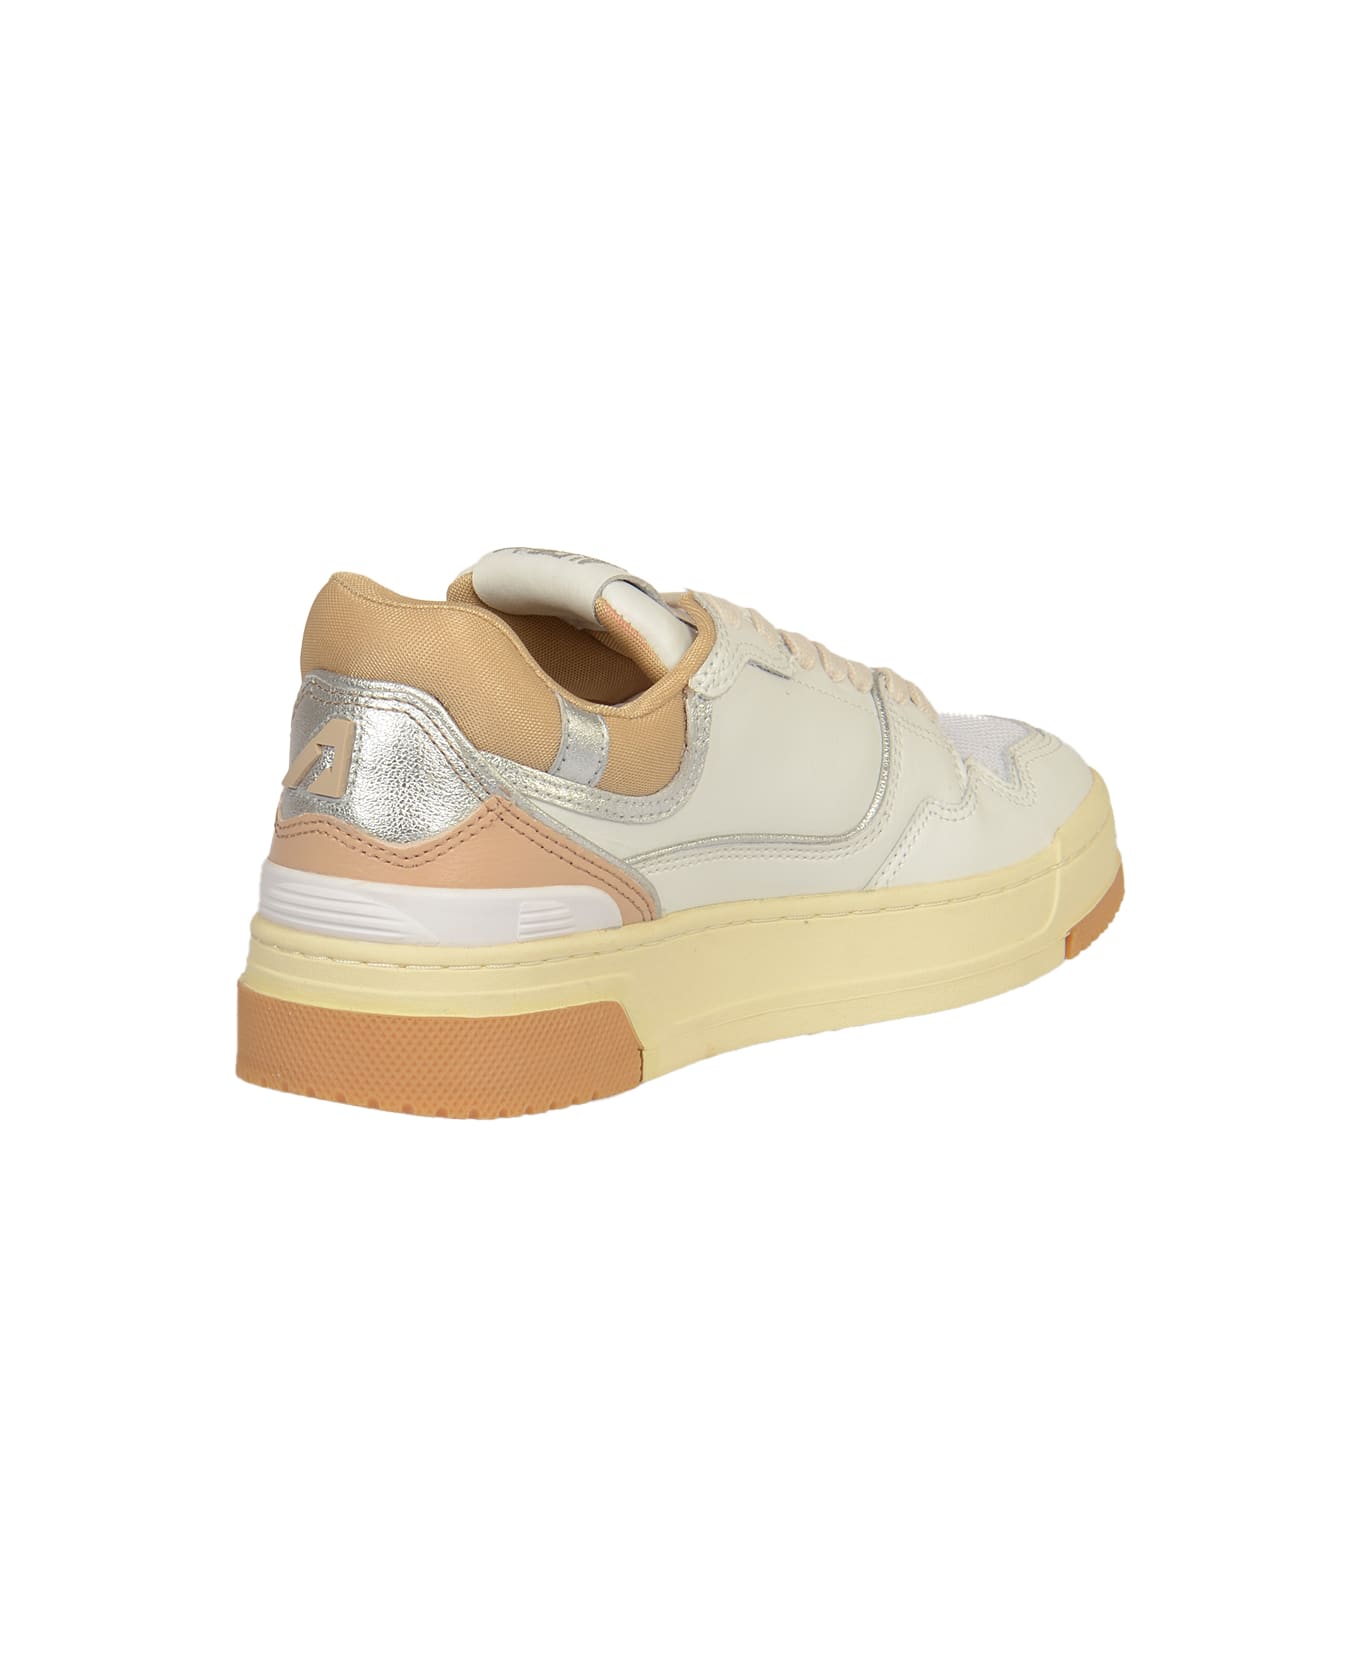 Autry Clc Low Sneakers - Wht/silv/candging